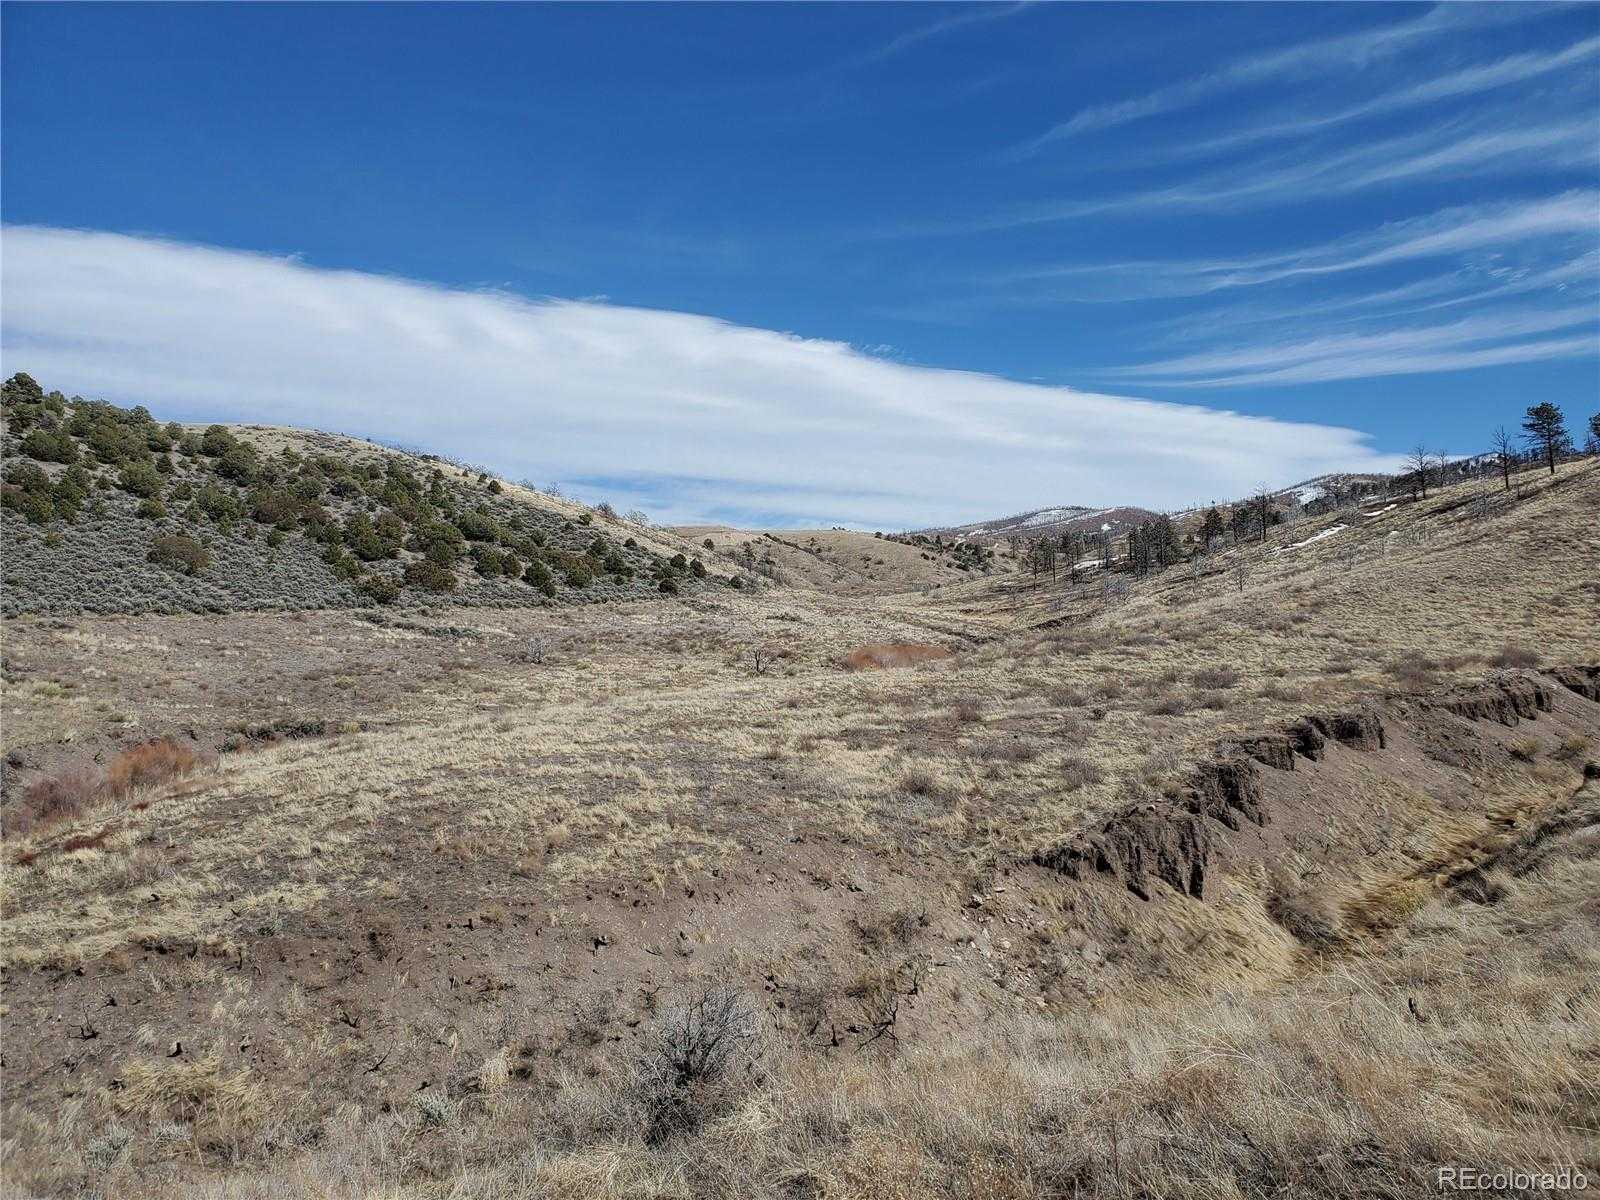 View Fort Garland, CO 81133 land